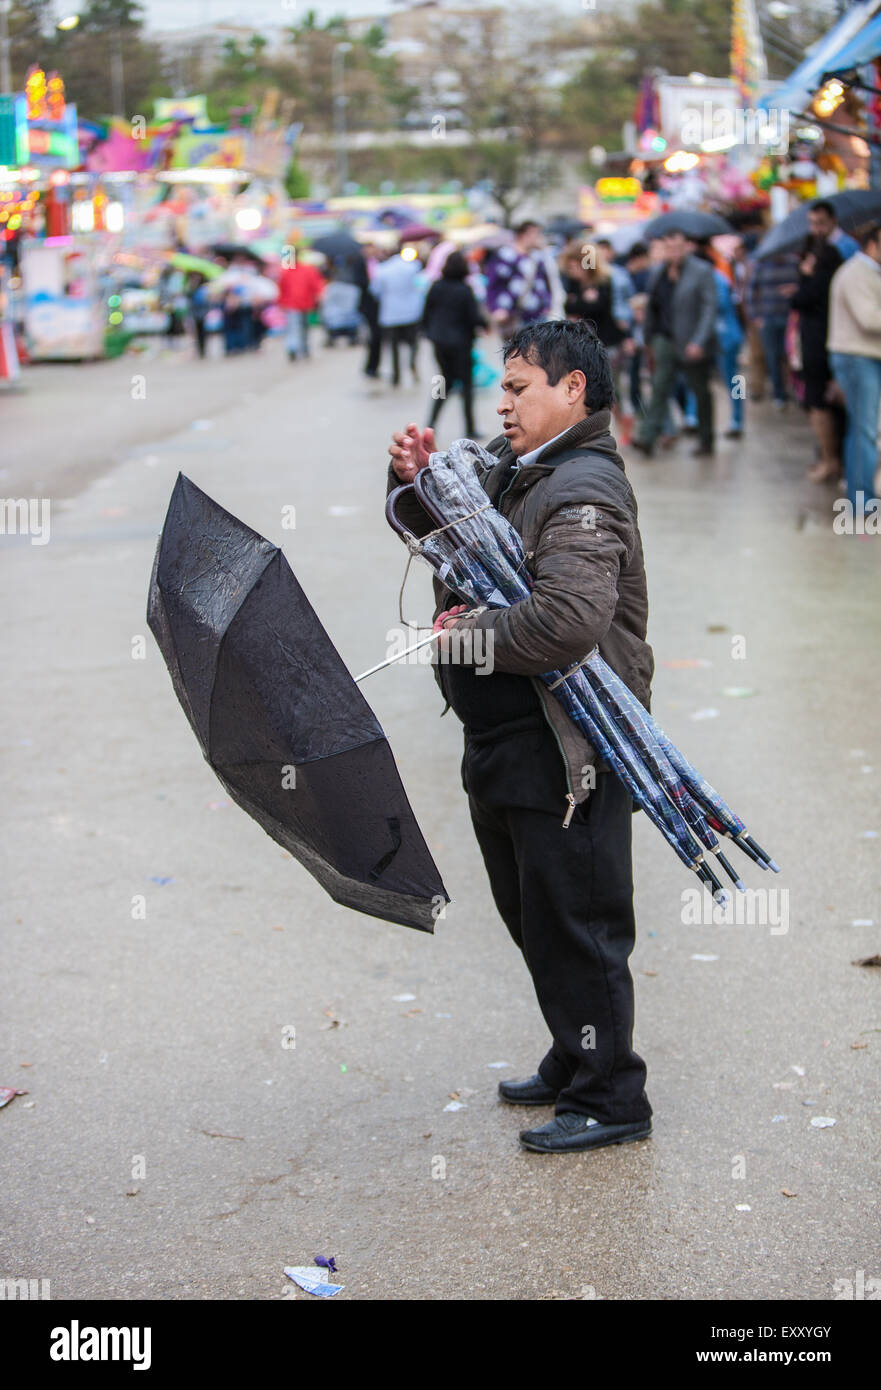 Umbrella salesman on a wet rainy day in Seville, Andalucia, Spain, Europe. At April Feria Festival. Stock Photo